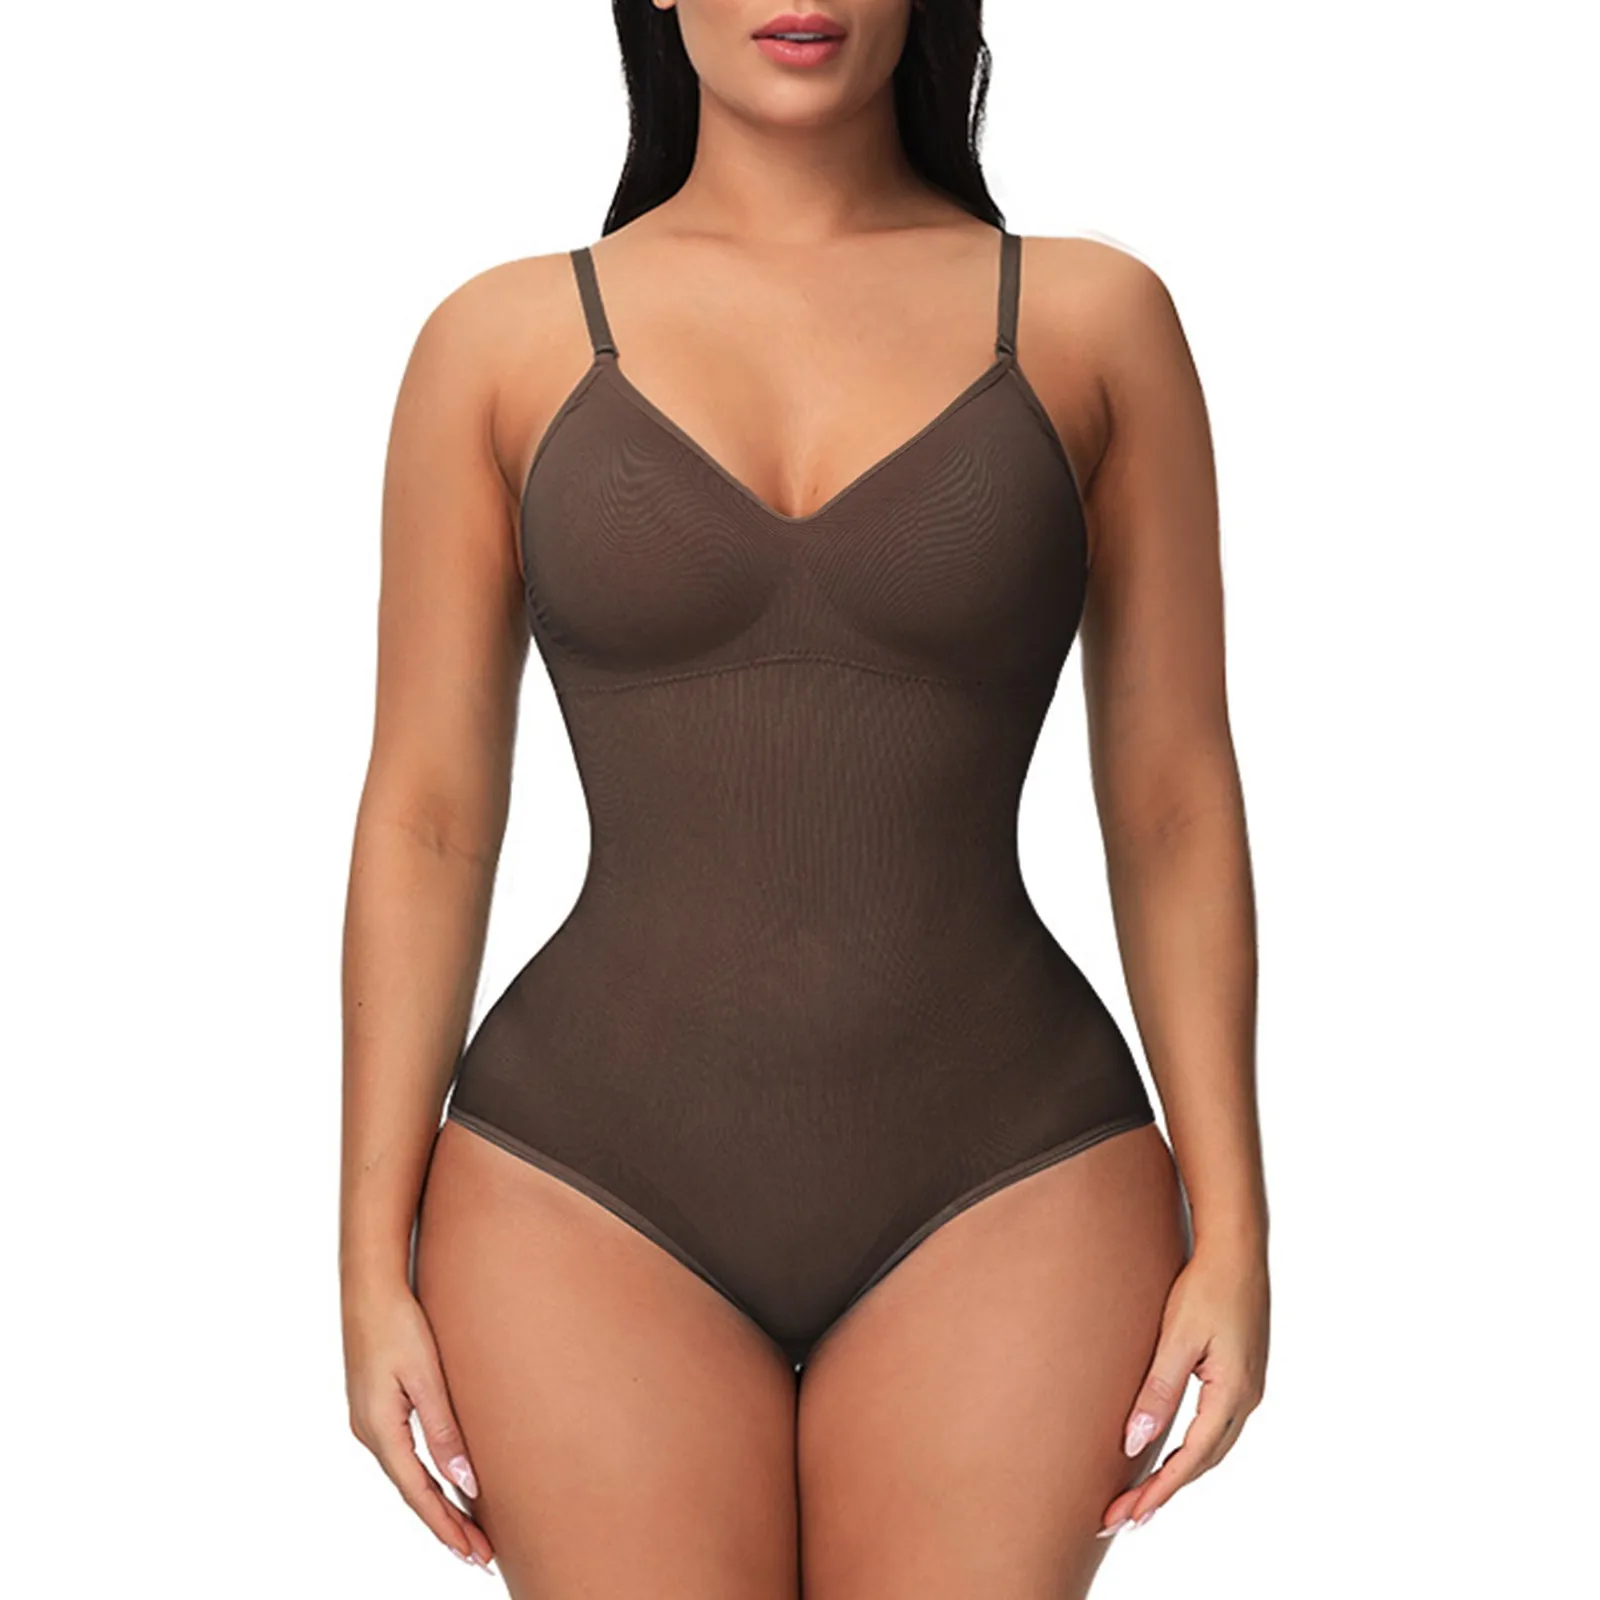 Seamless Shapewear Bodysuit For Women Tummy Control Butt Lifter Body Shaper Invisible Under Dress Slimming Strap Thong Underwear